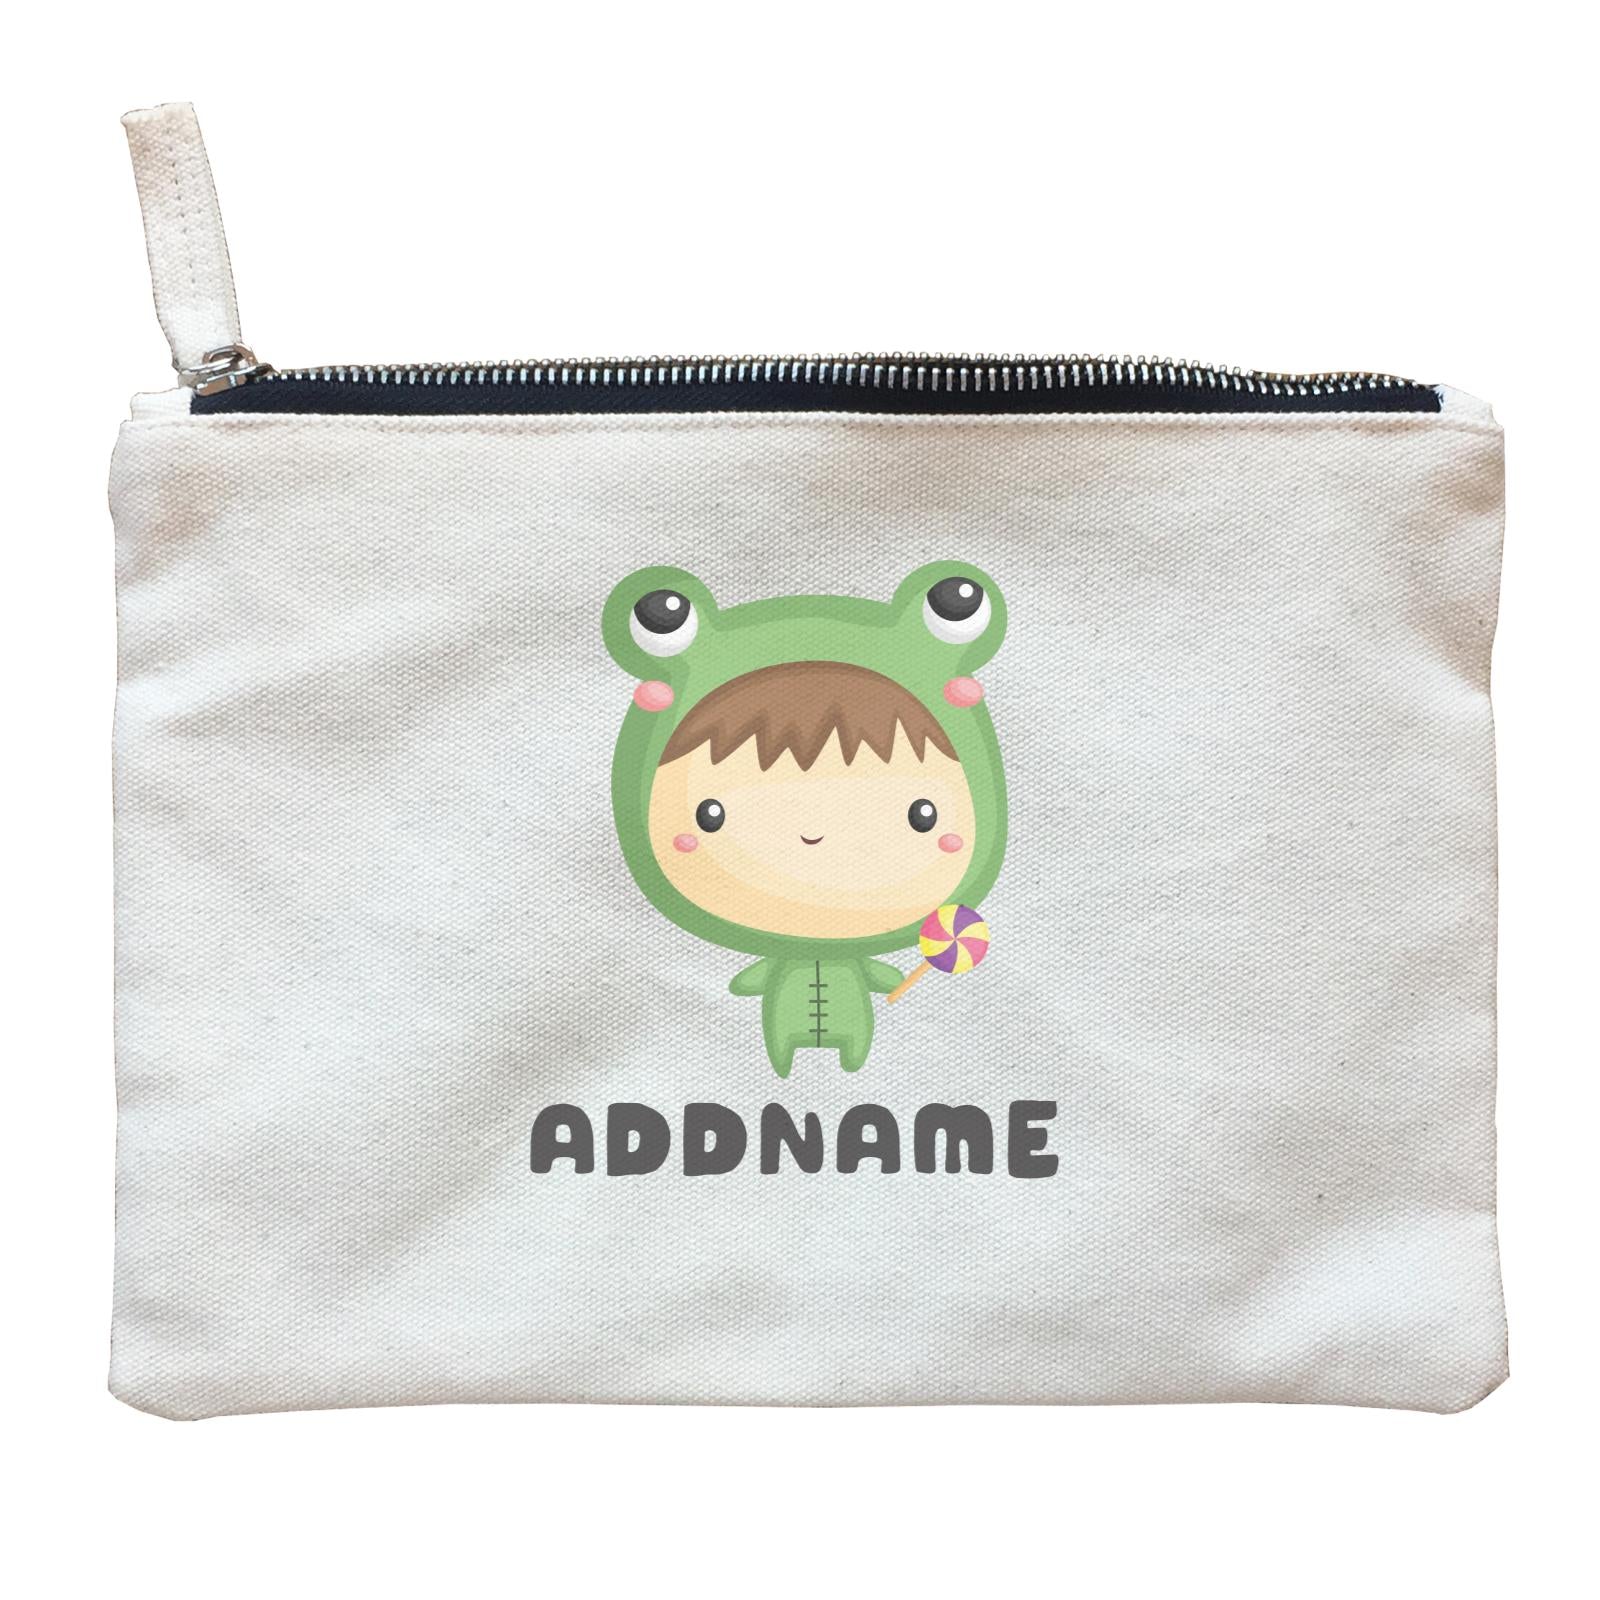 Birthday Frog Baby Boy Wearing Frog Suit Holding Lolipop Addname Zipper Pouch